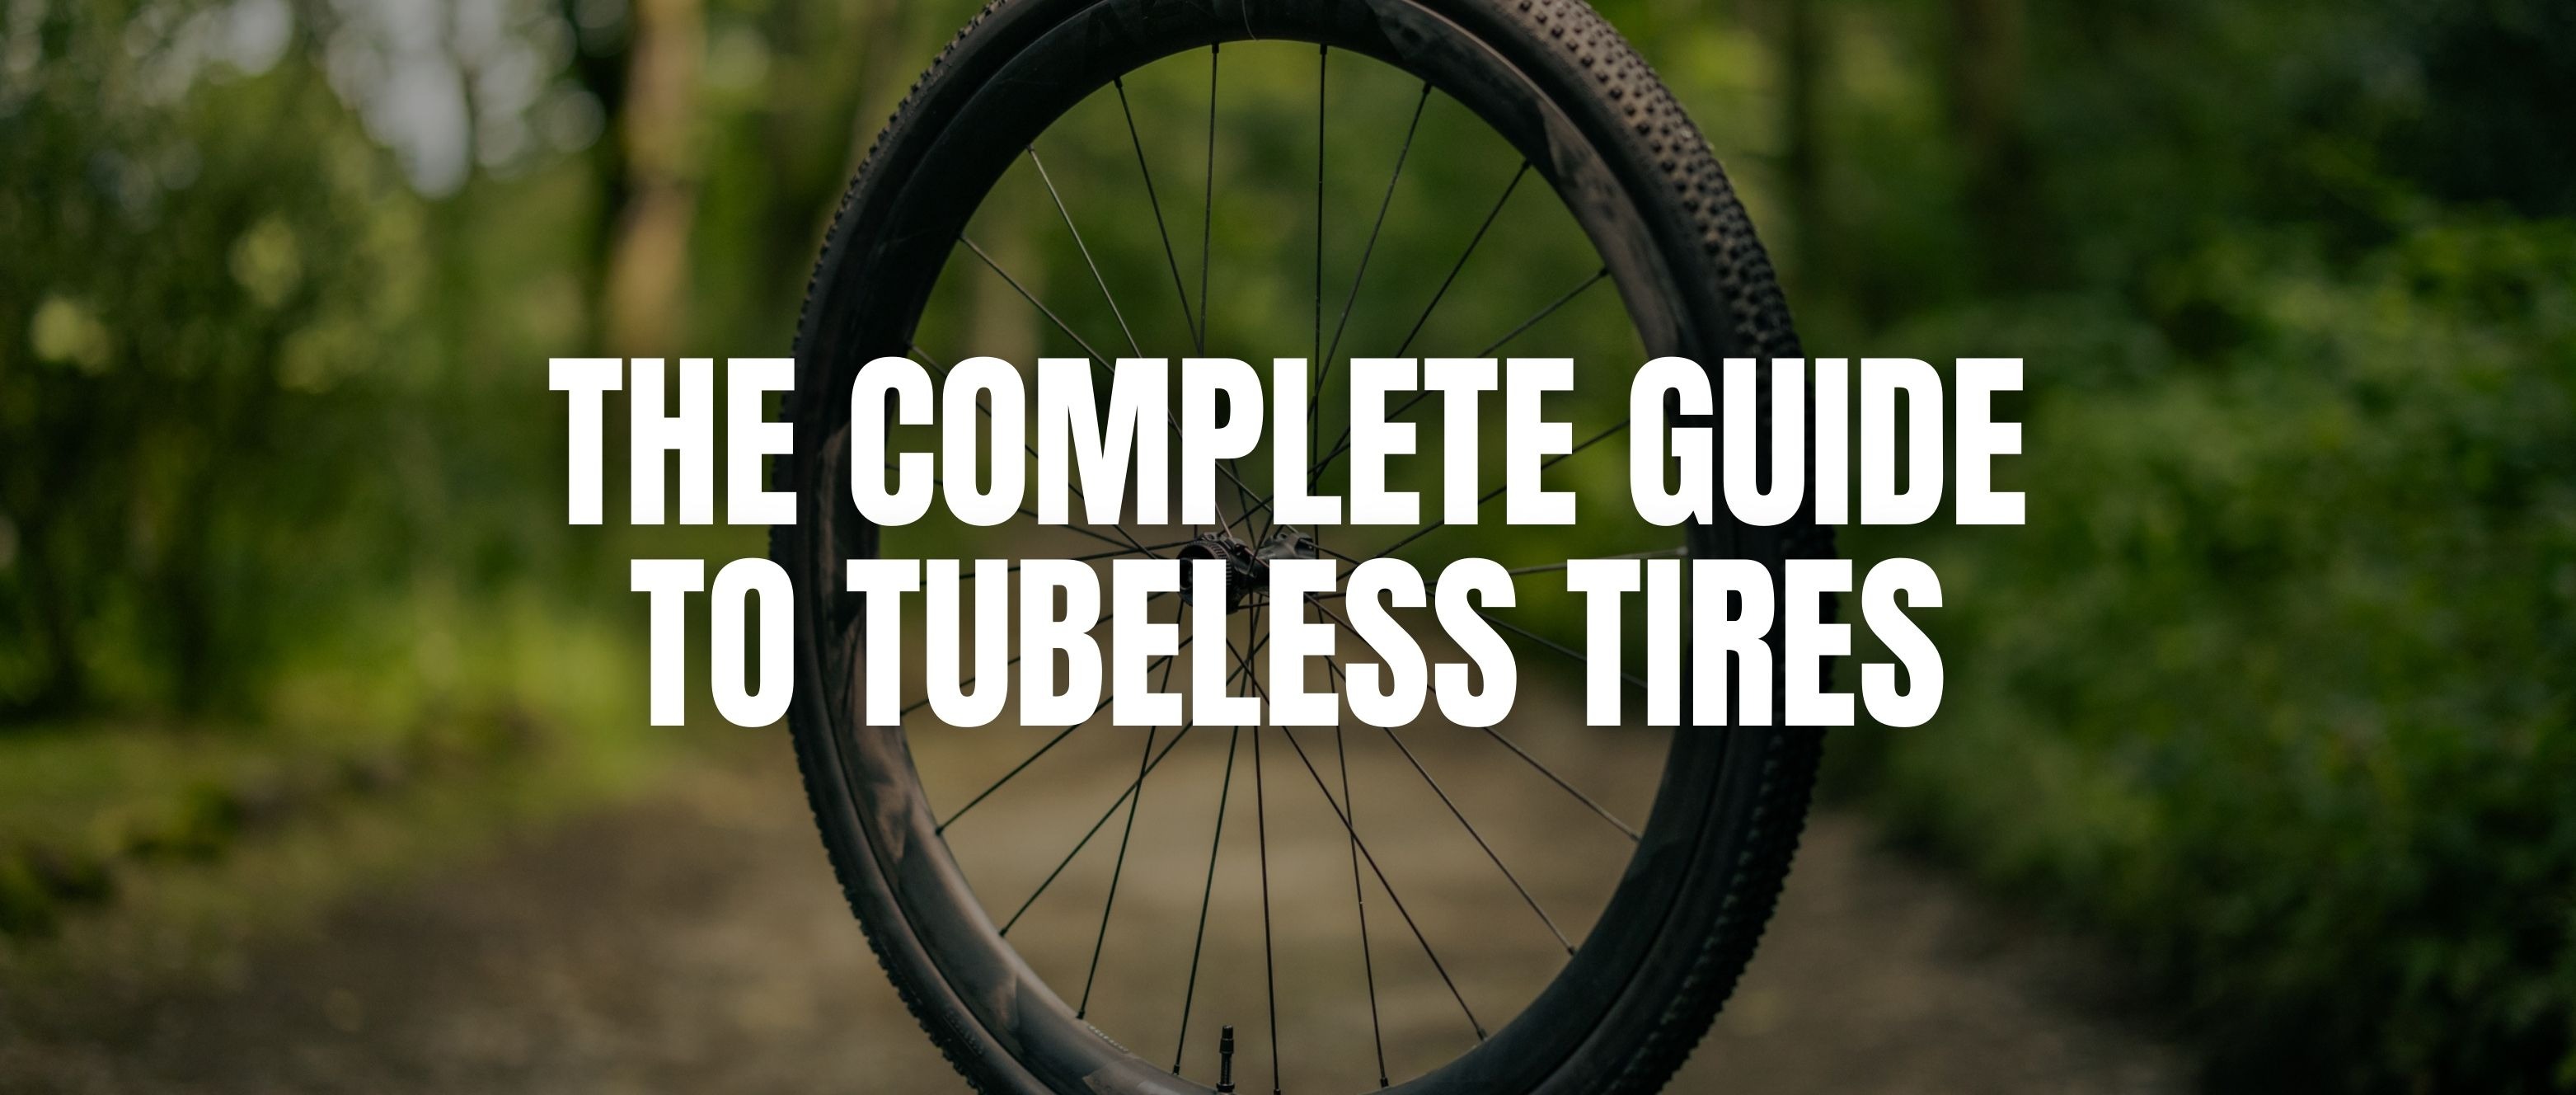 The Complete Guide to Tubeless Tires